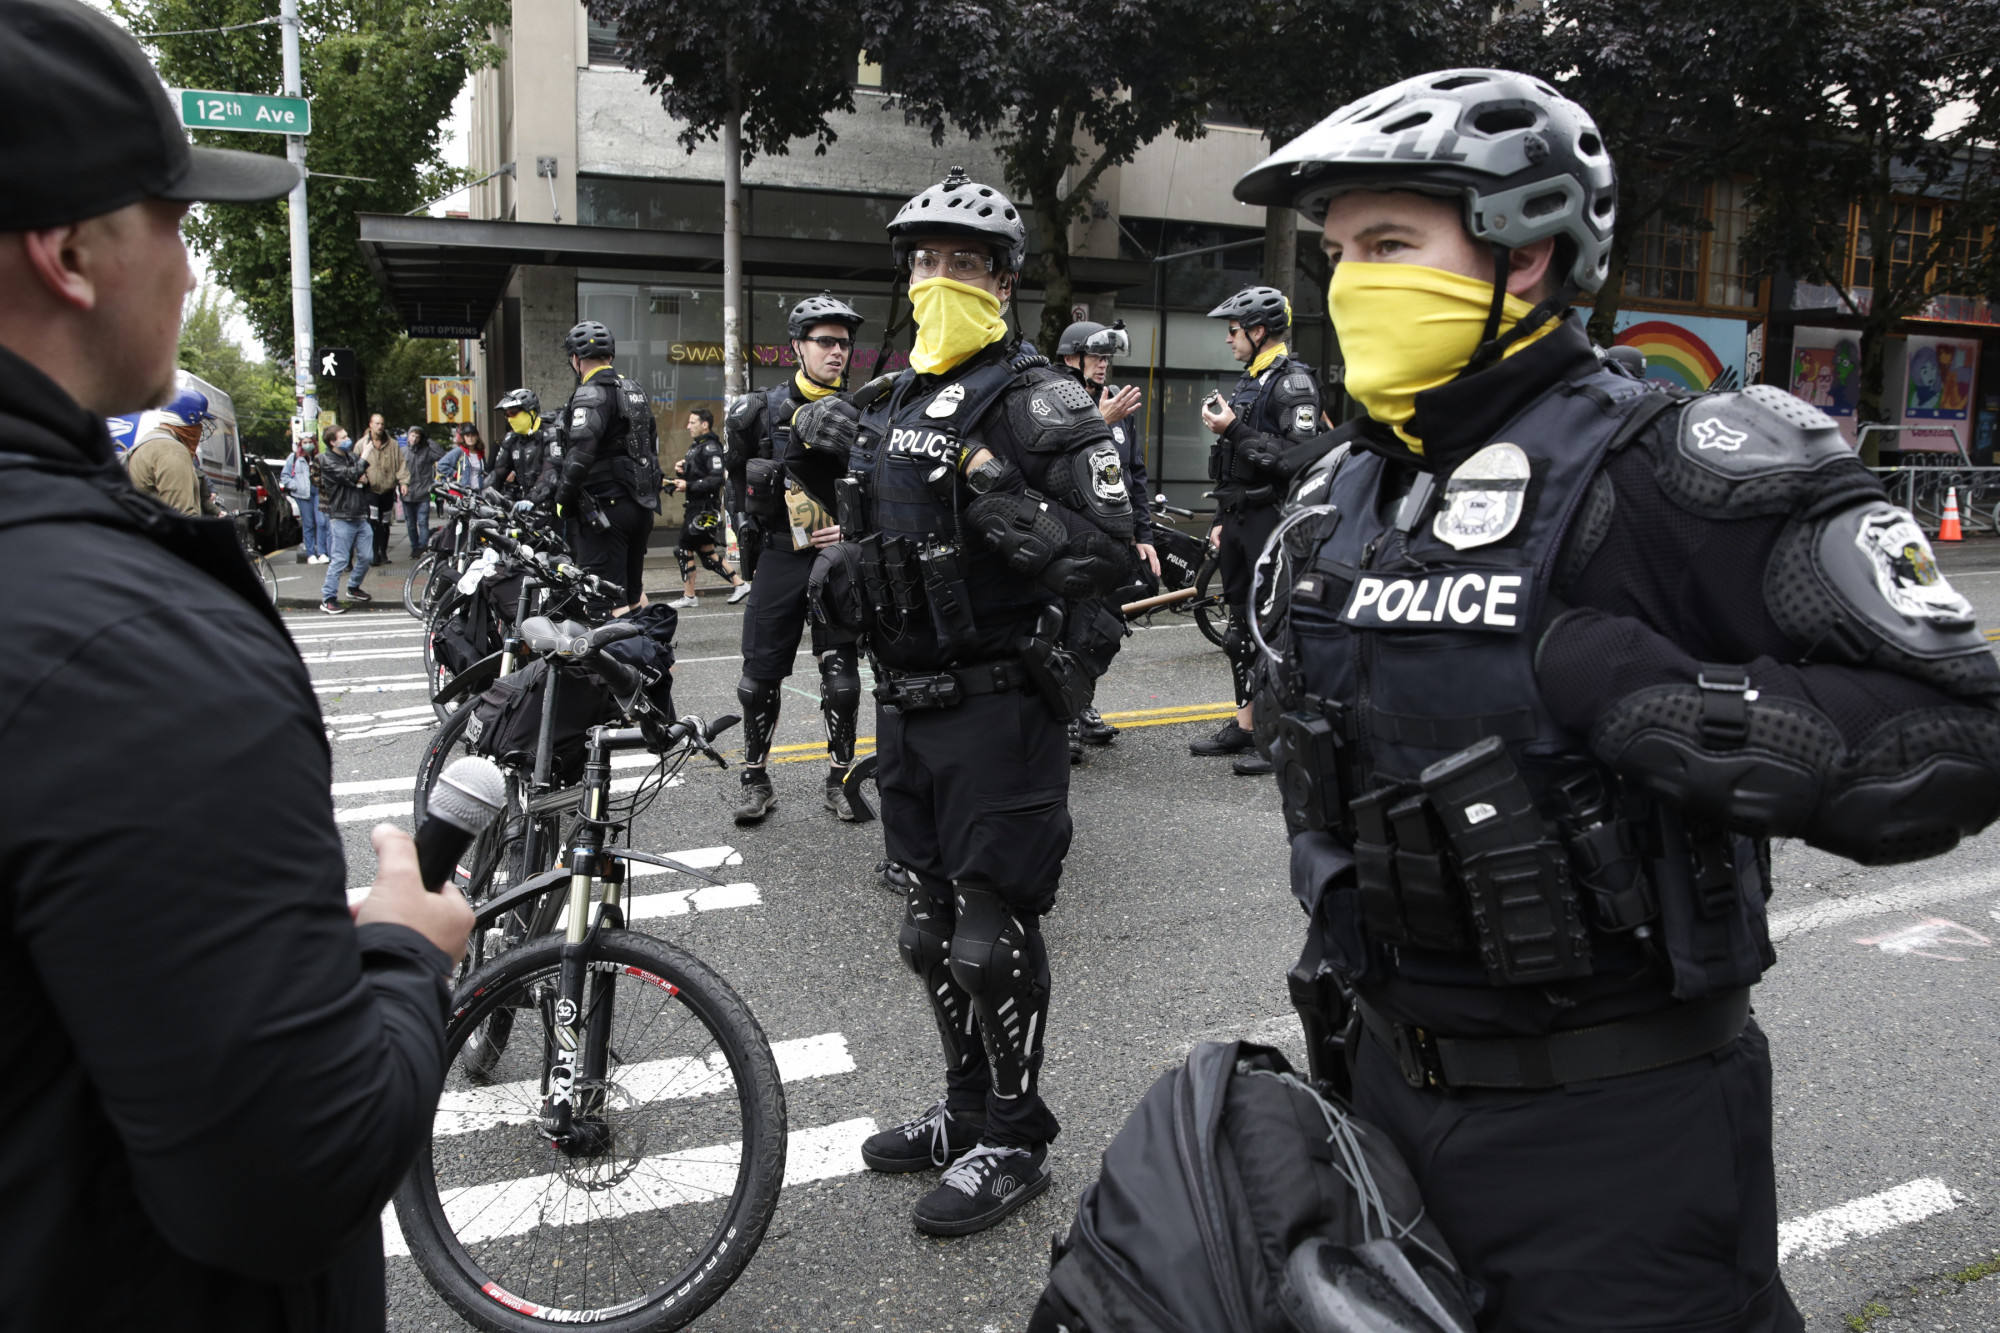 Seattle City Council Approves Nearly $4 Million in Cuts to Police Department